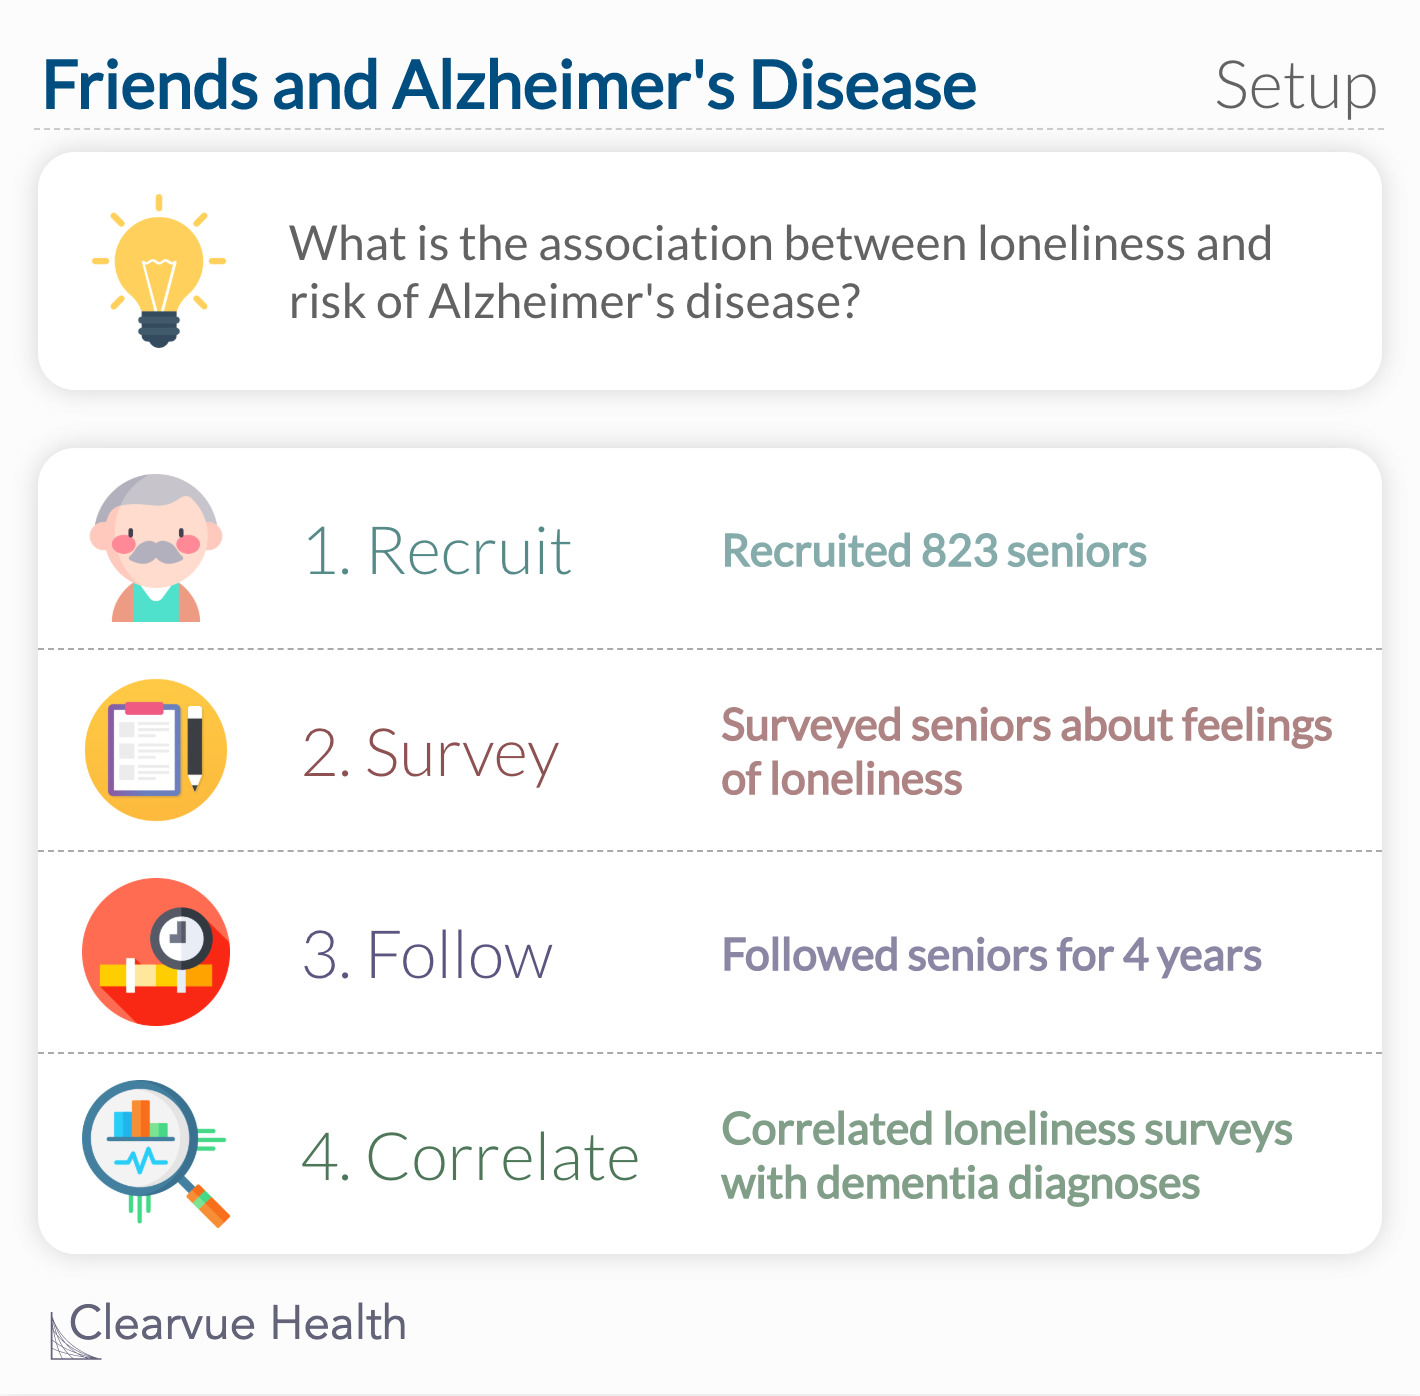 What is the association between loneliness and risk of Alzheimer's disease?